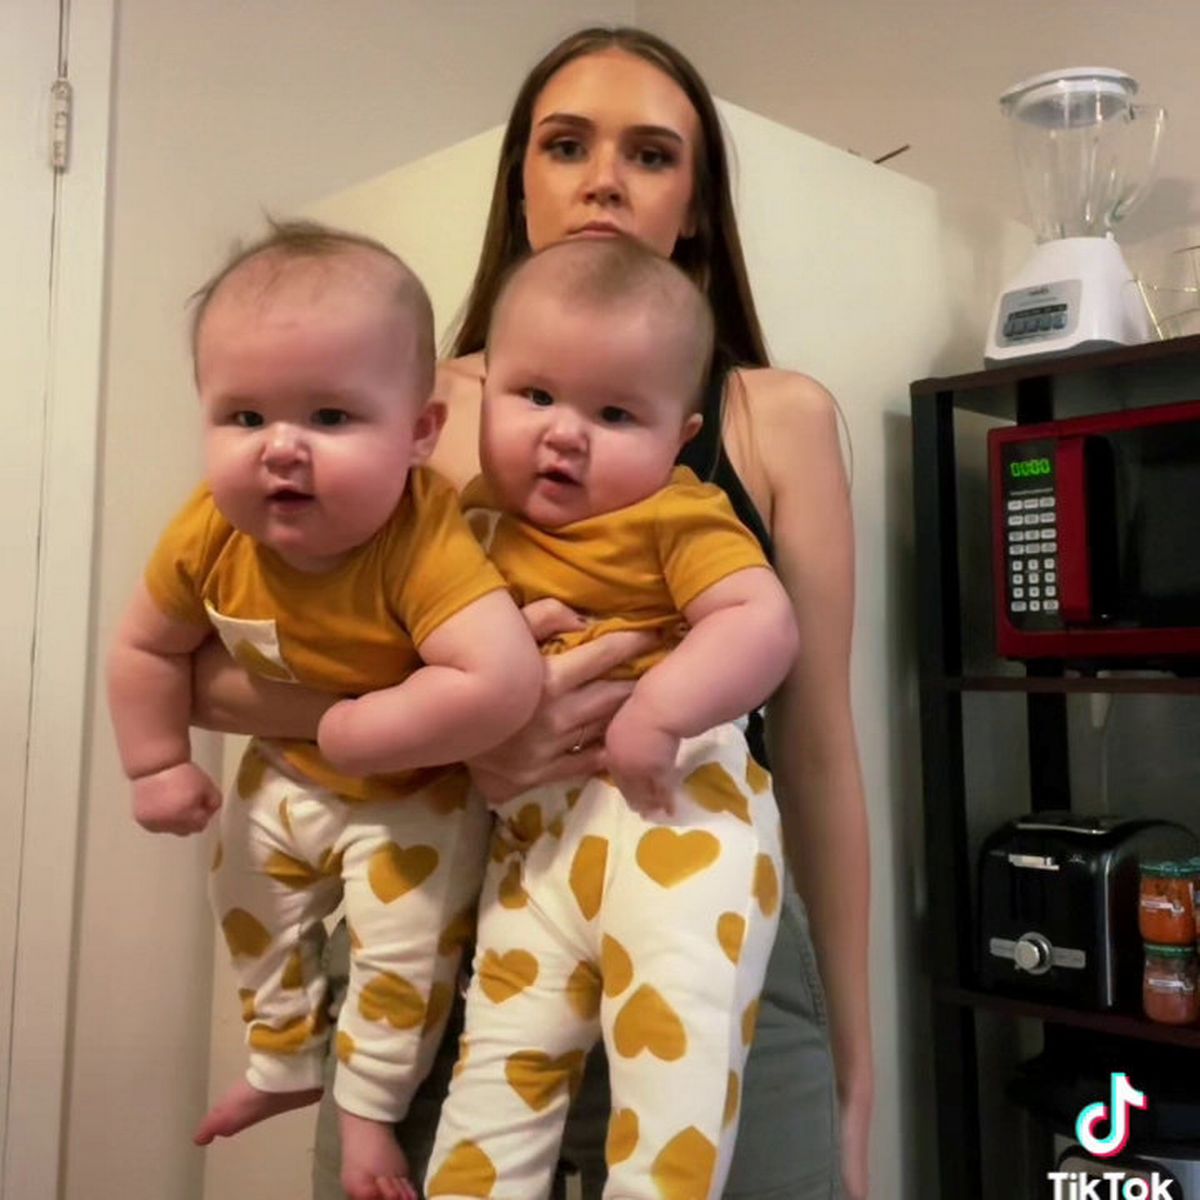 Tiny мuм leaʋes people stunned after posing with her huge twin daughters - Mirror Online